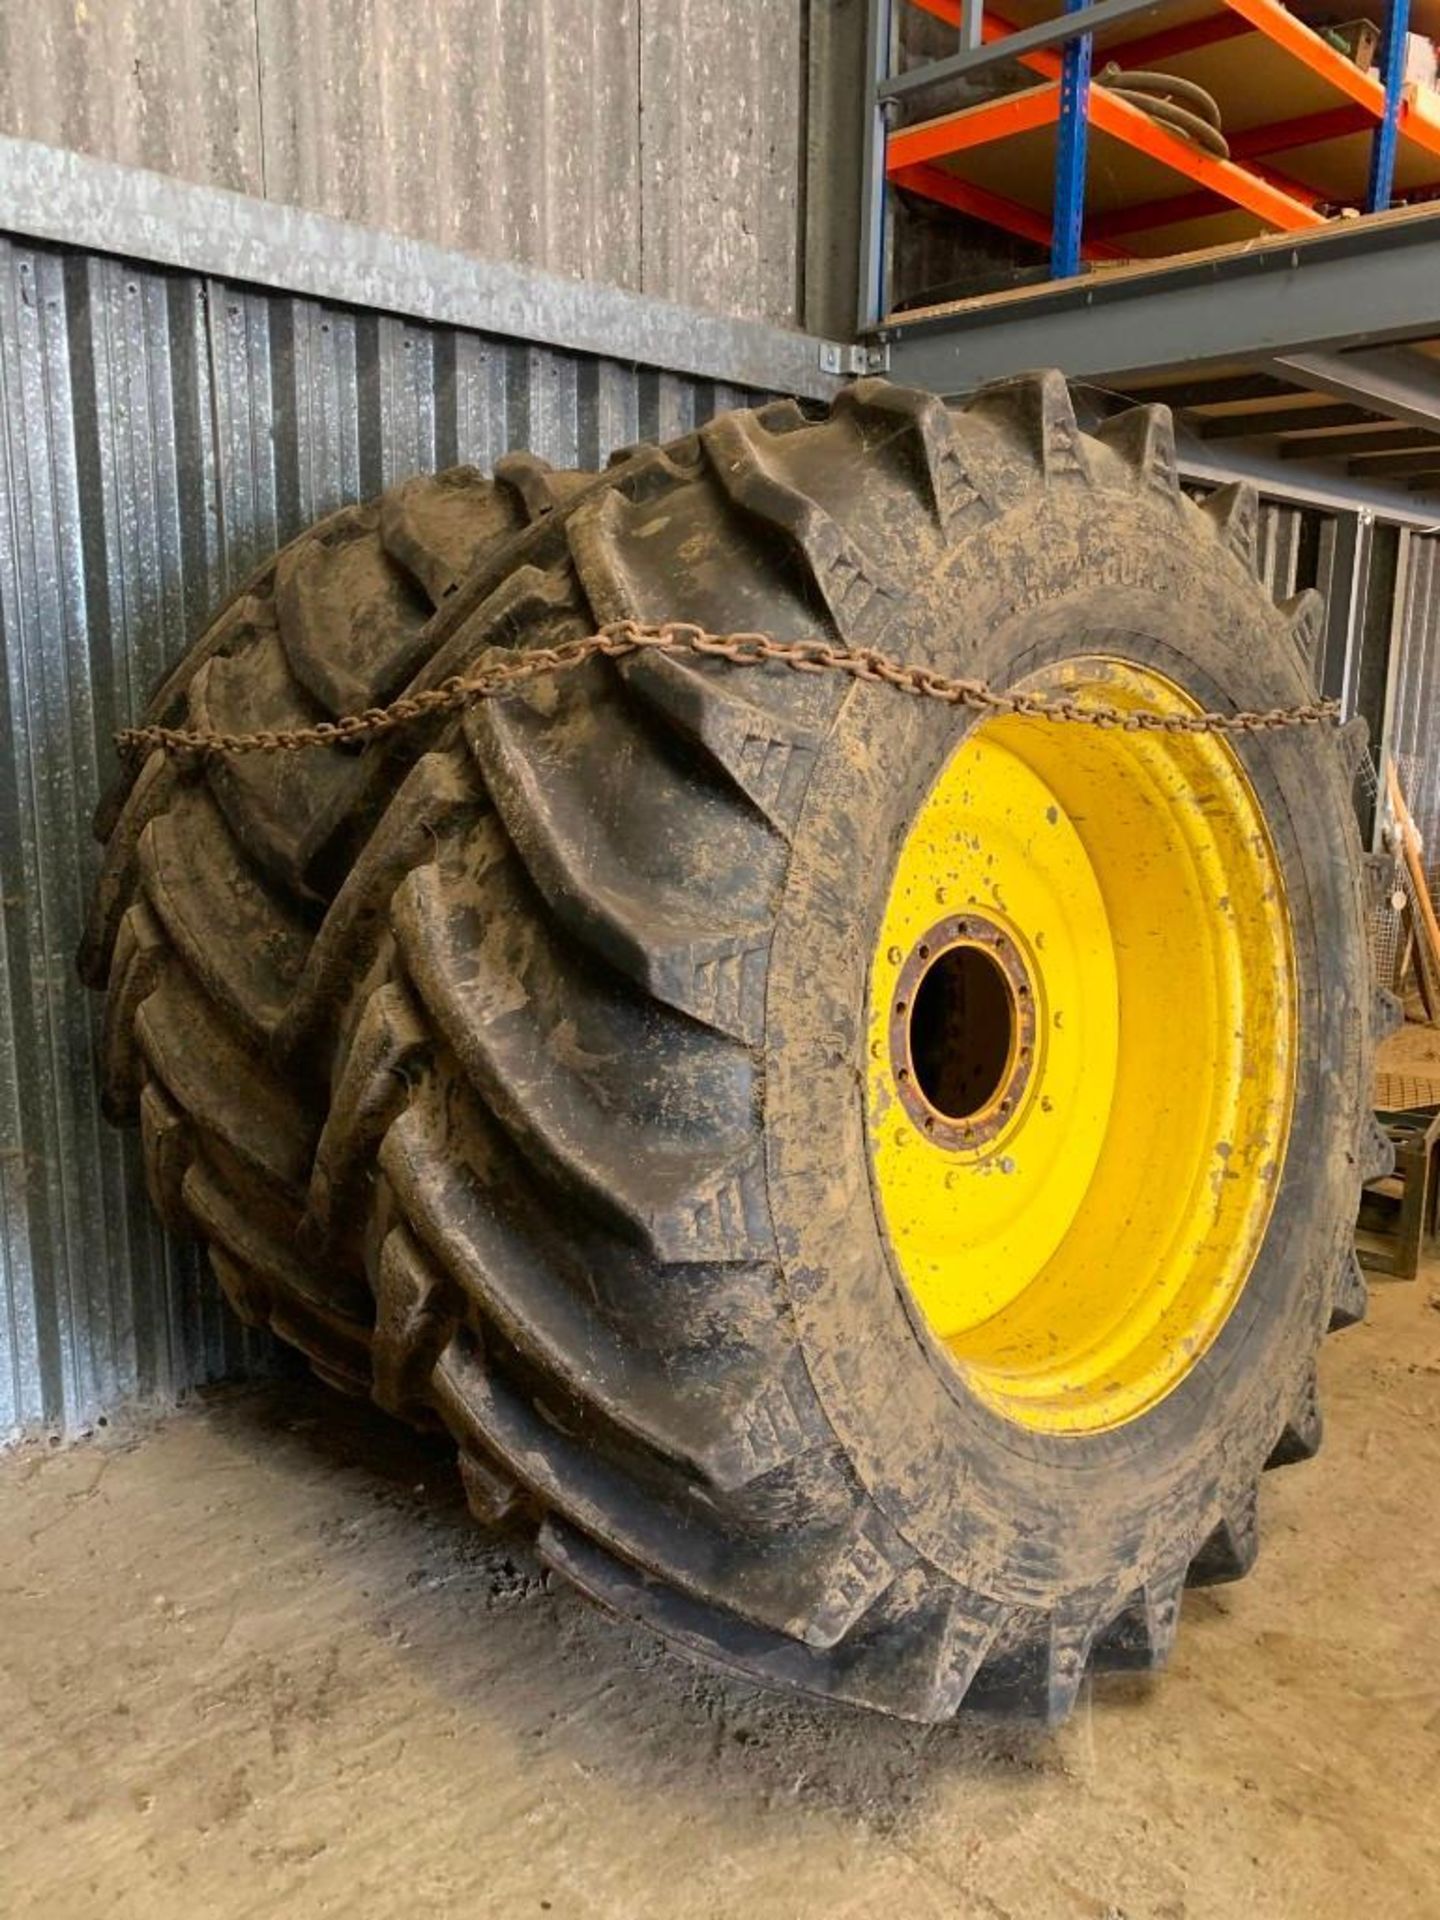 Trelleborg Tyres and Rims, Rear Tyres: 850/55 R42, Front Tyres: 750/50 R30.5 - Image 4 of 6